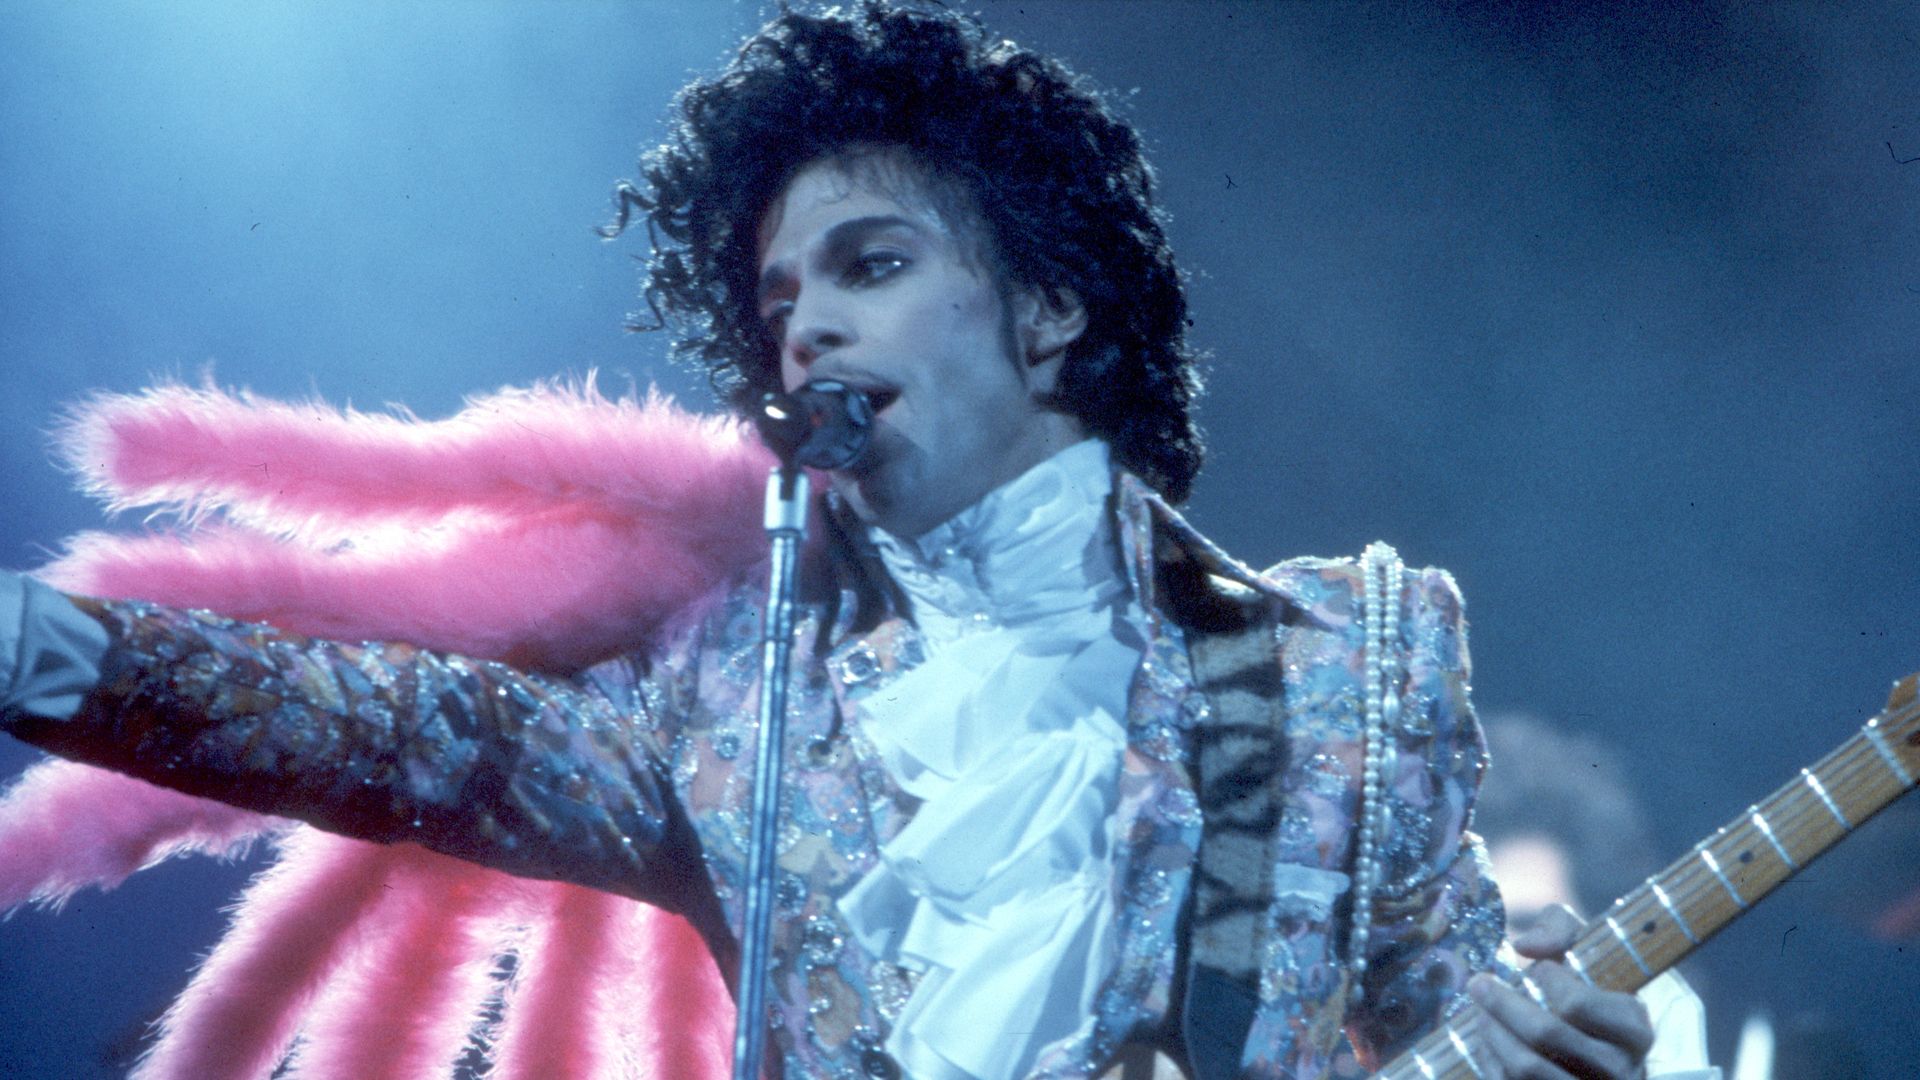 The musician Prince performing on stage.